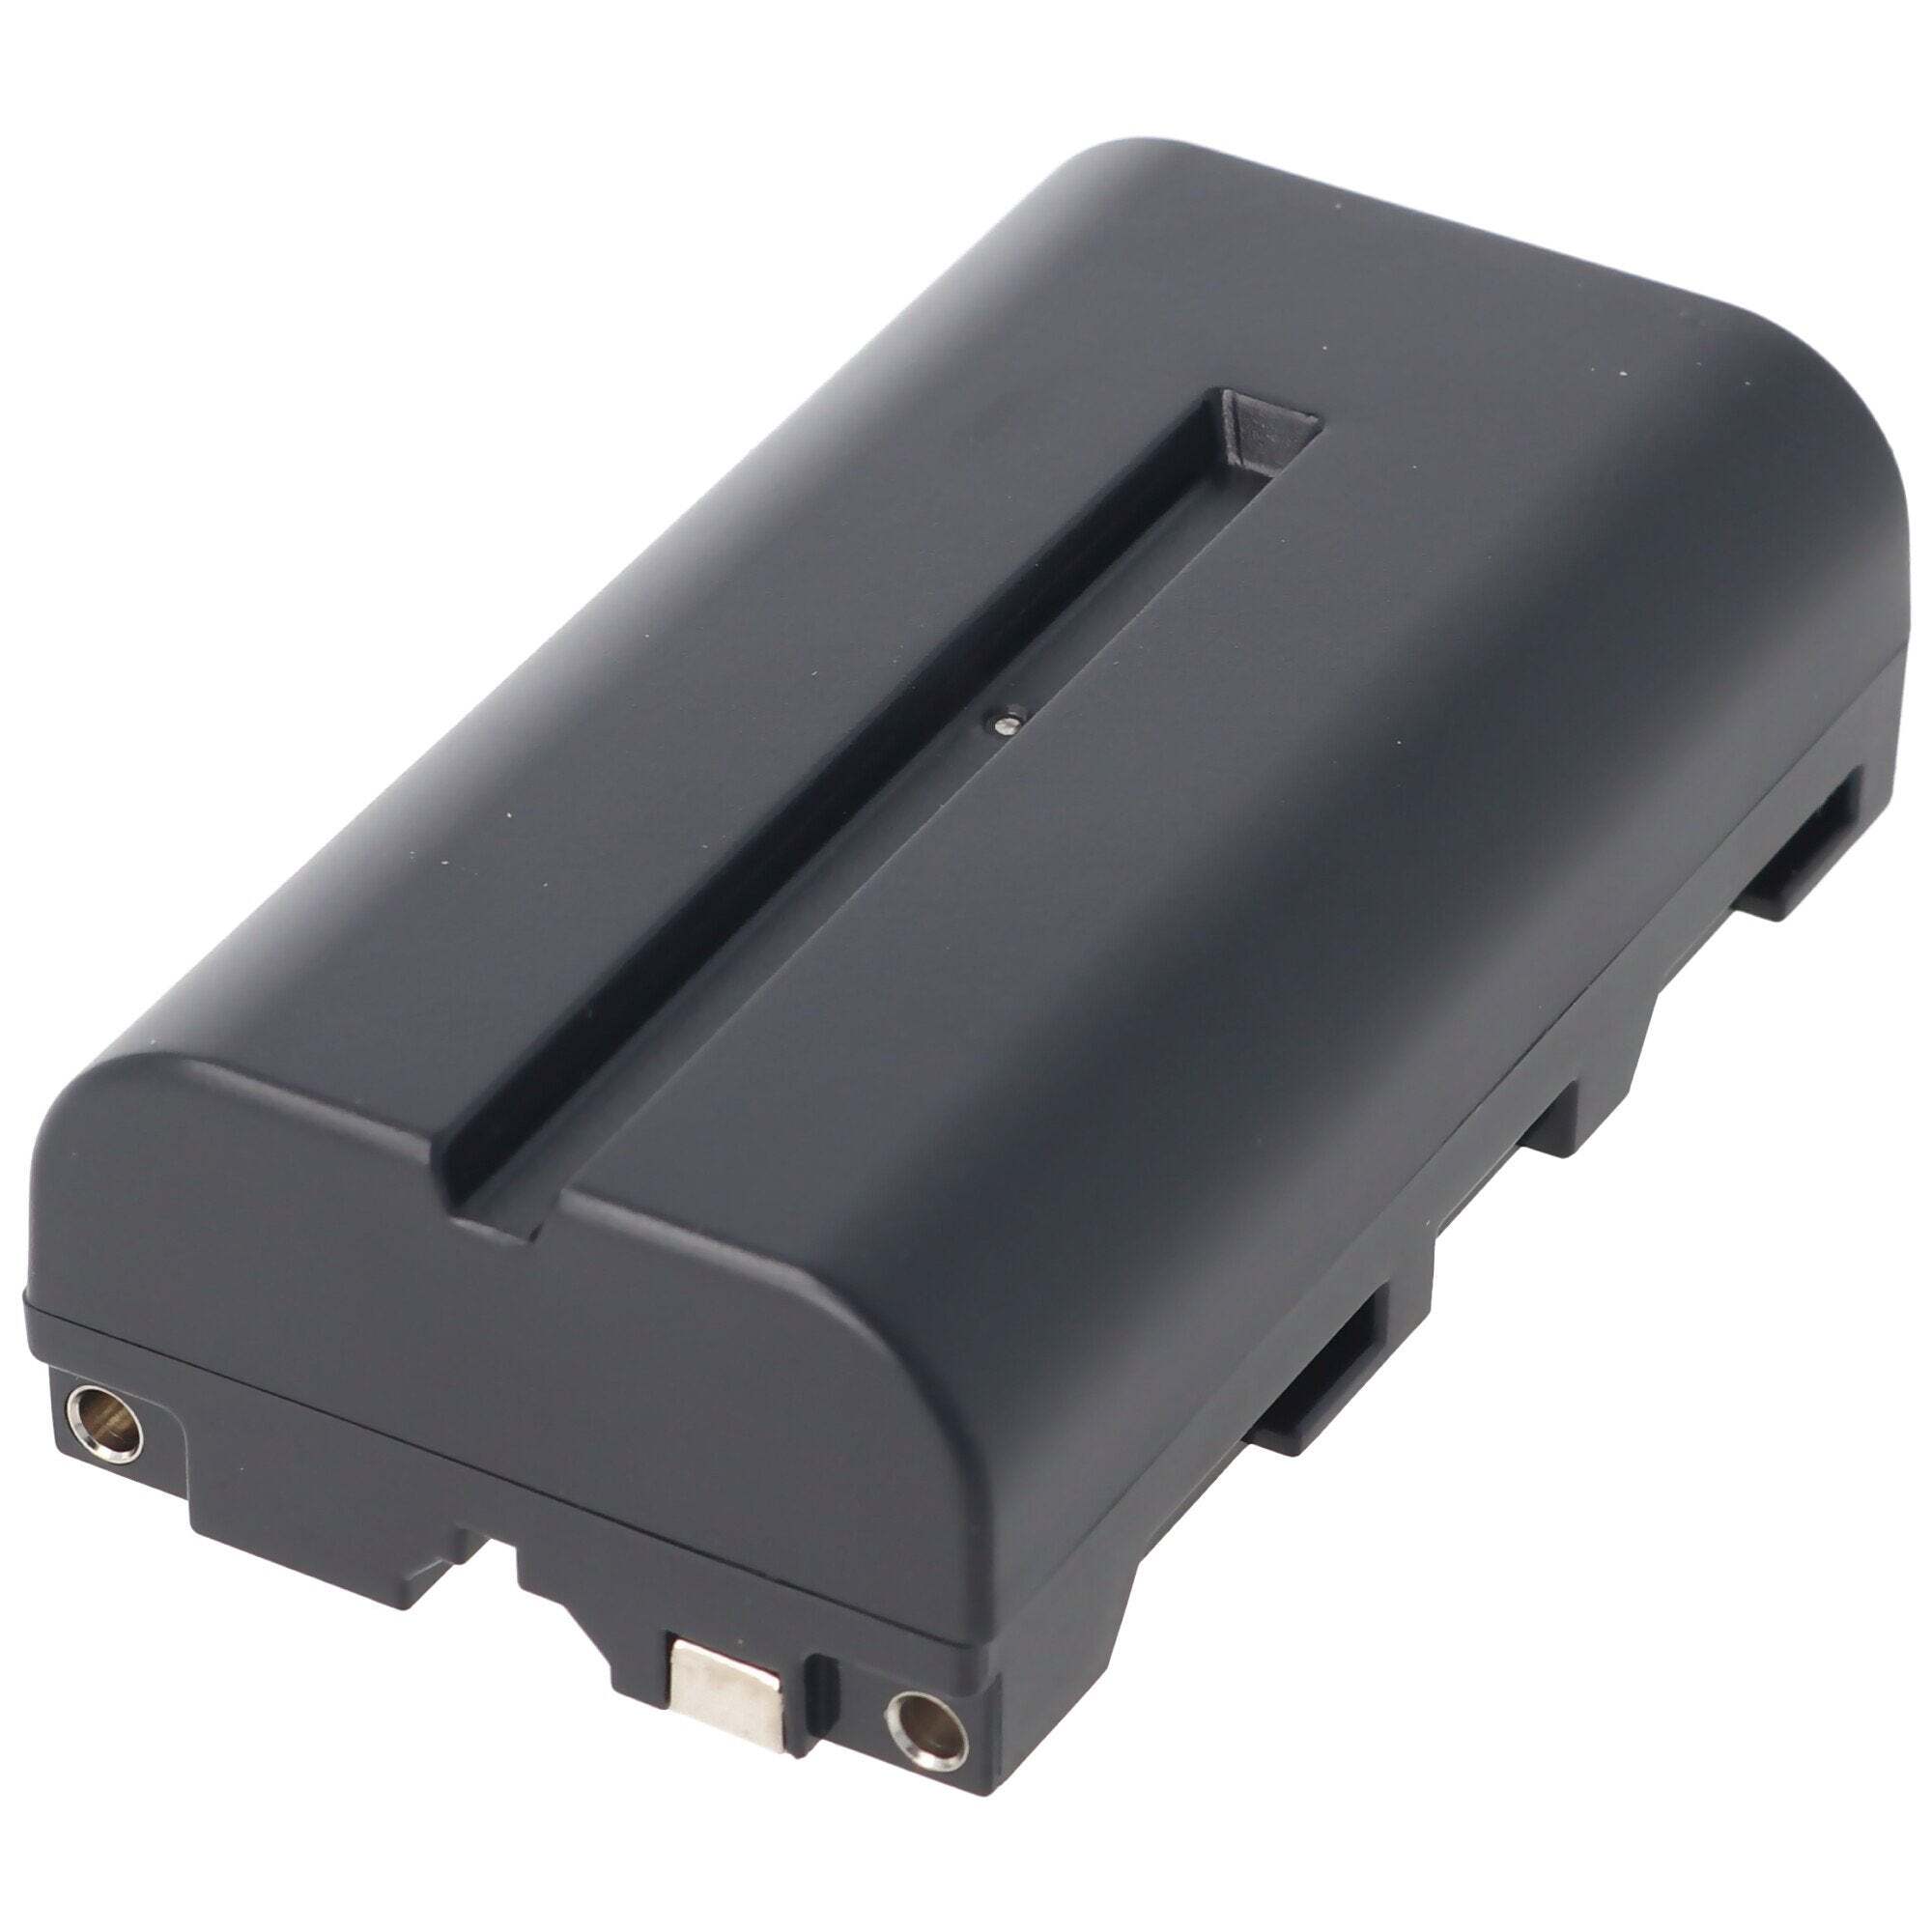 ACCUCELL AccuCell-batterij geschikt voor Sony NP-F330, CCD-SC, CCD-TR, NP-F330, NP-F550